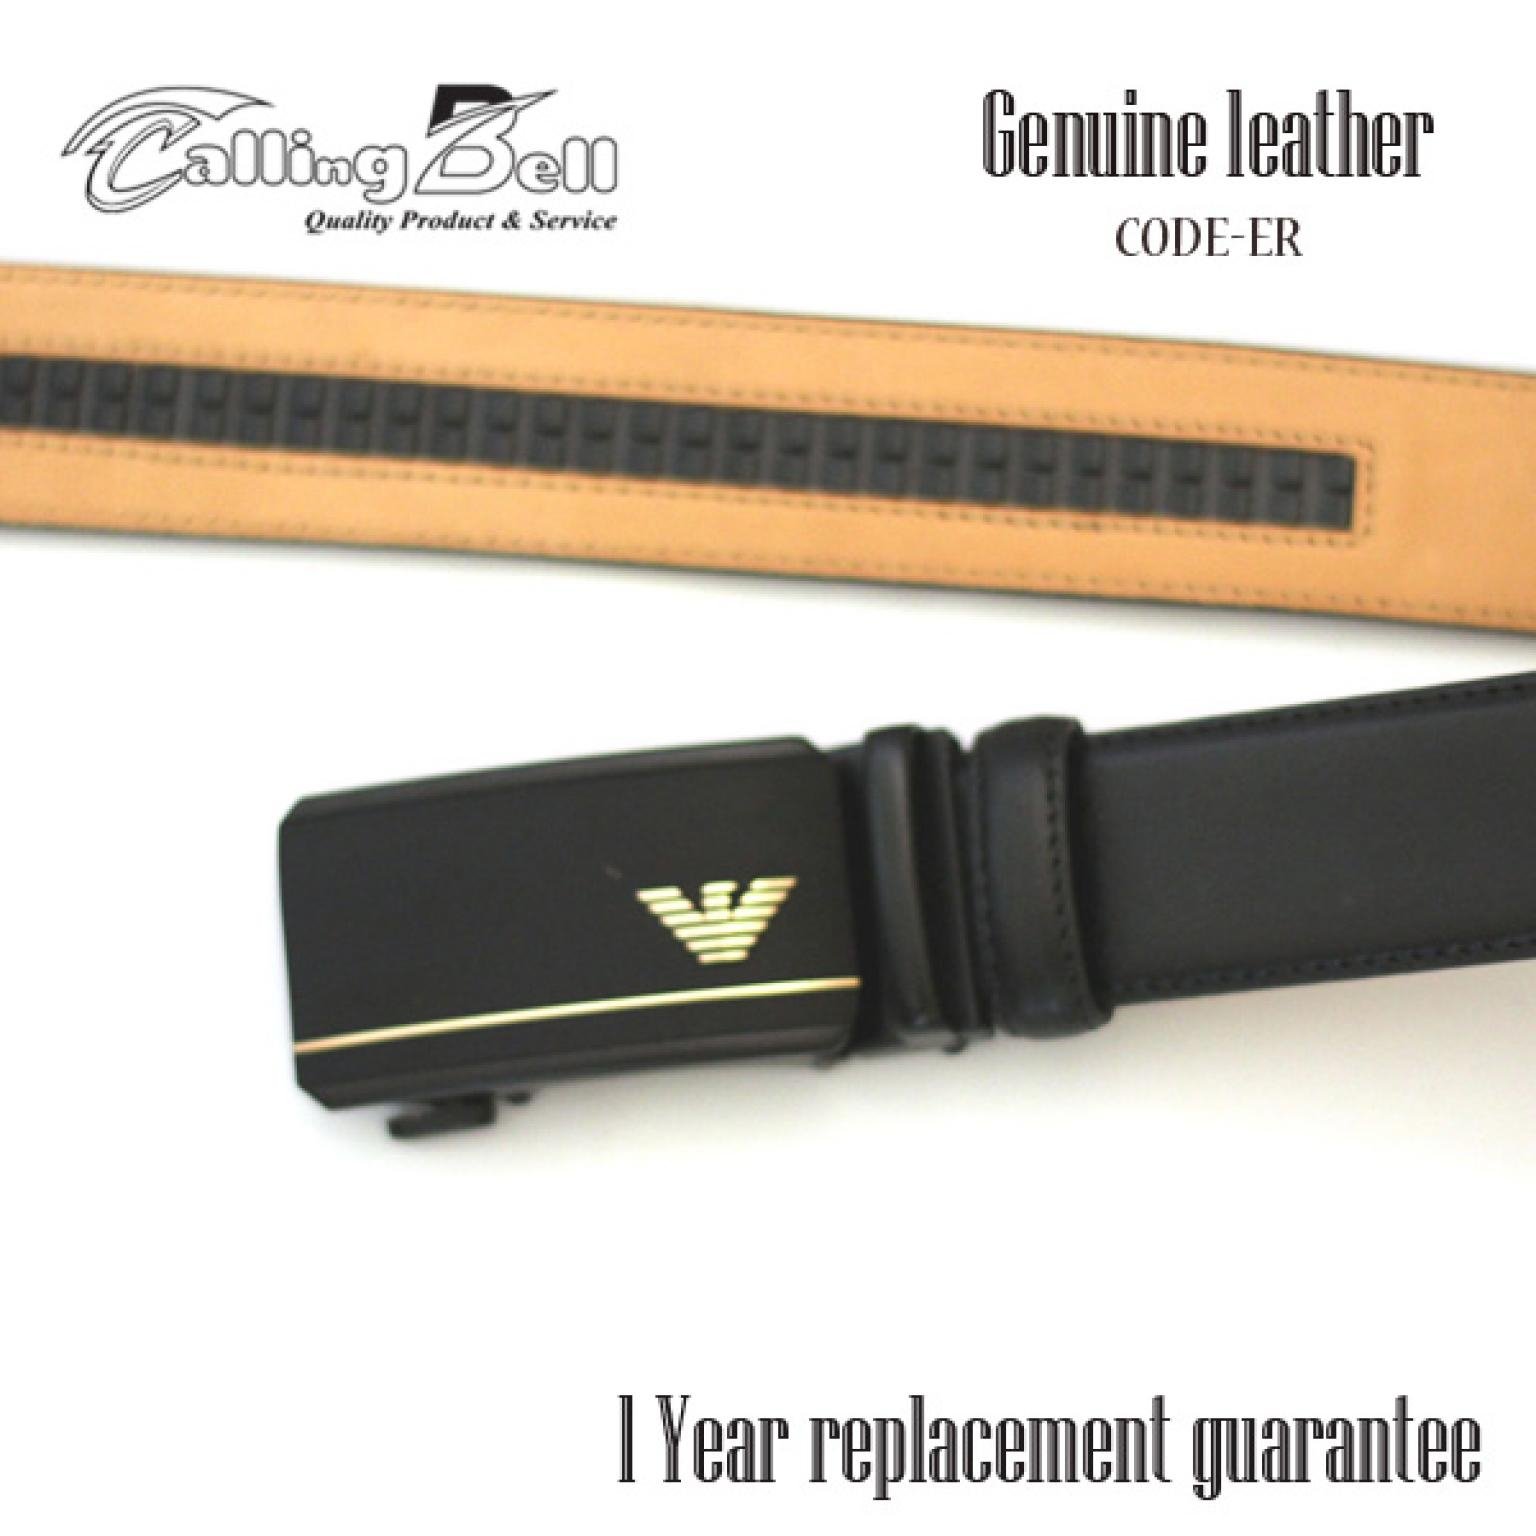 GENUINE_LEATHER SOFT AUTO GEAR BELT CASUAL AND  FORMAL FOR MEN (ER)